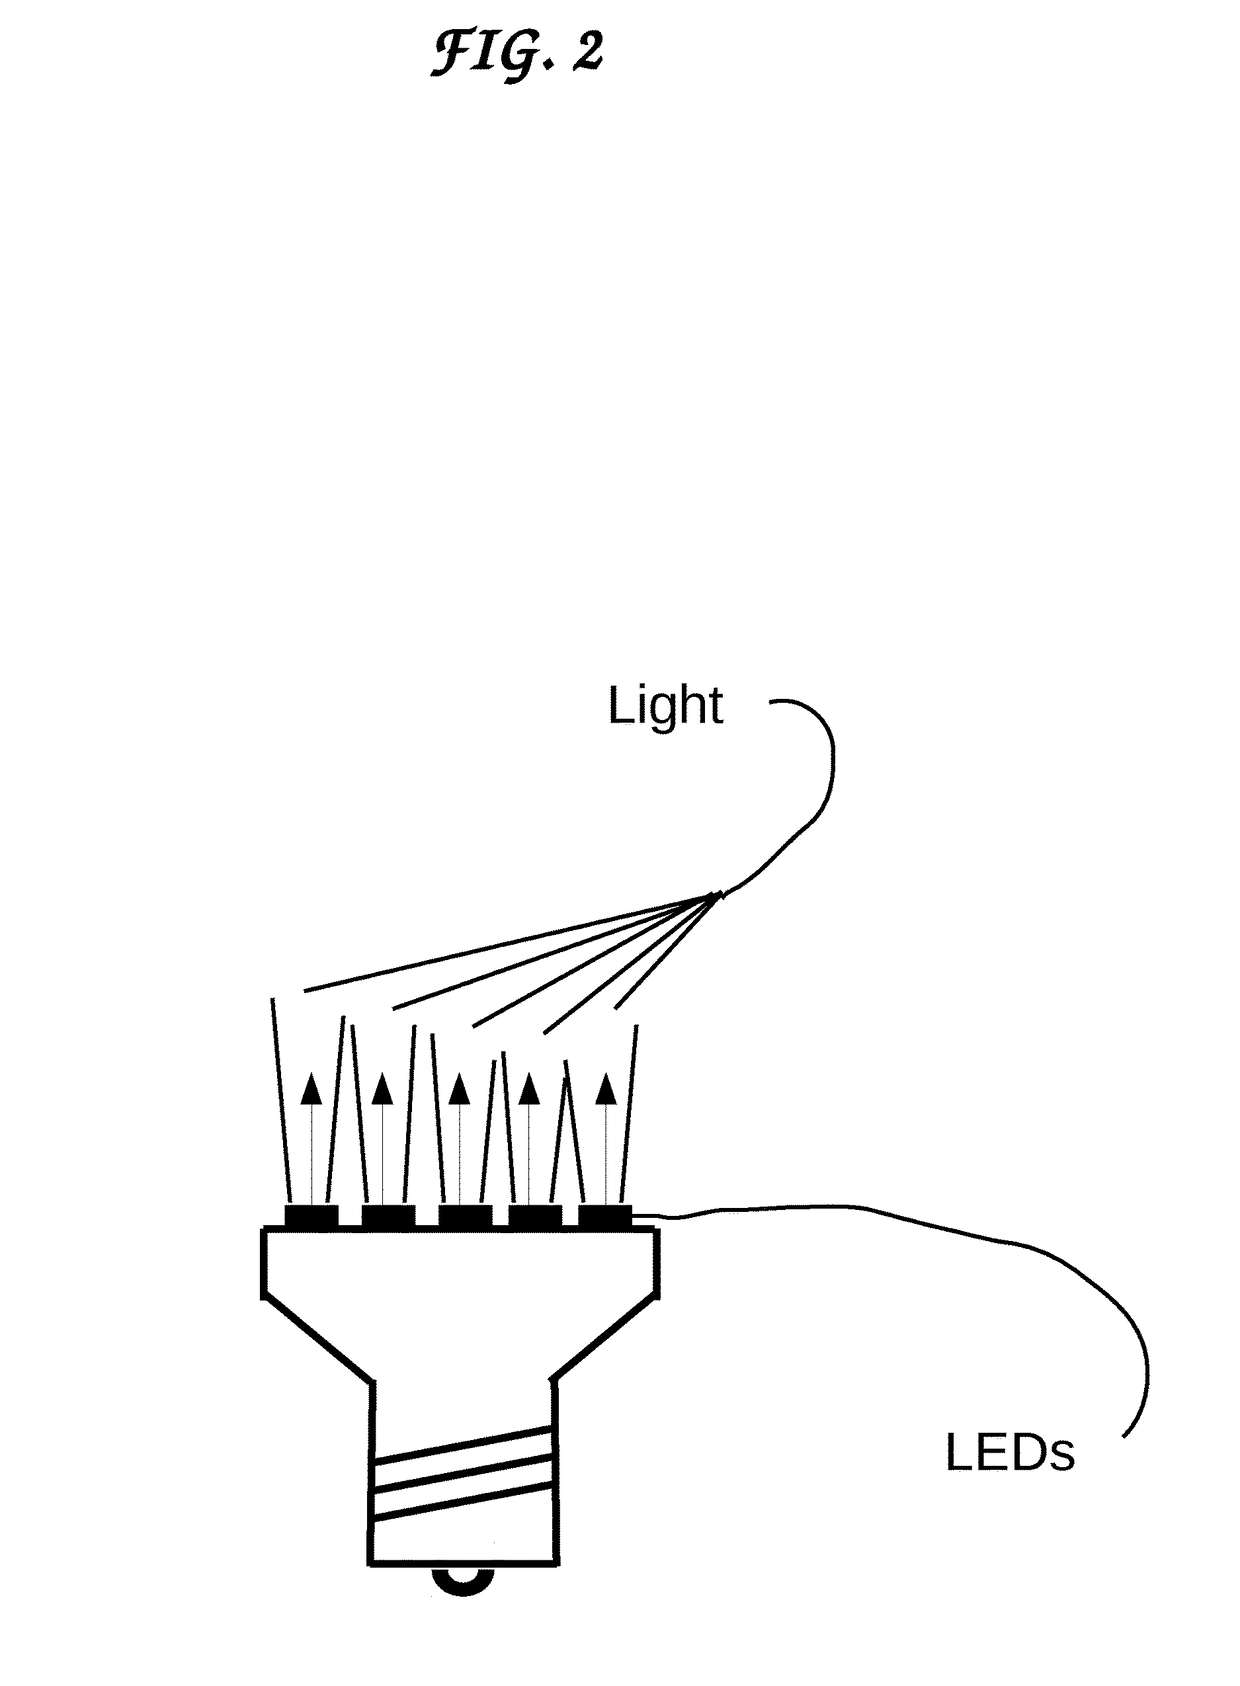 Method and means for reflecting light to produce soft indirect illumination while avoiding scattering enclosures